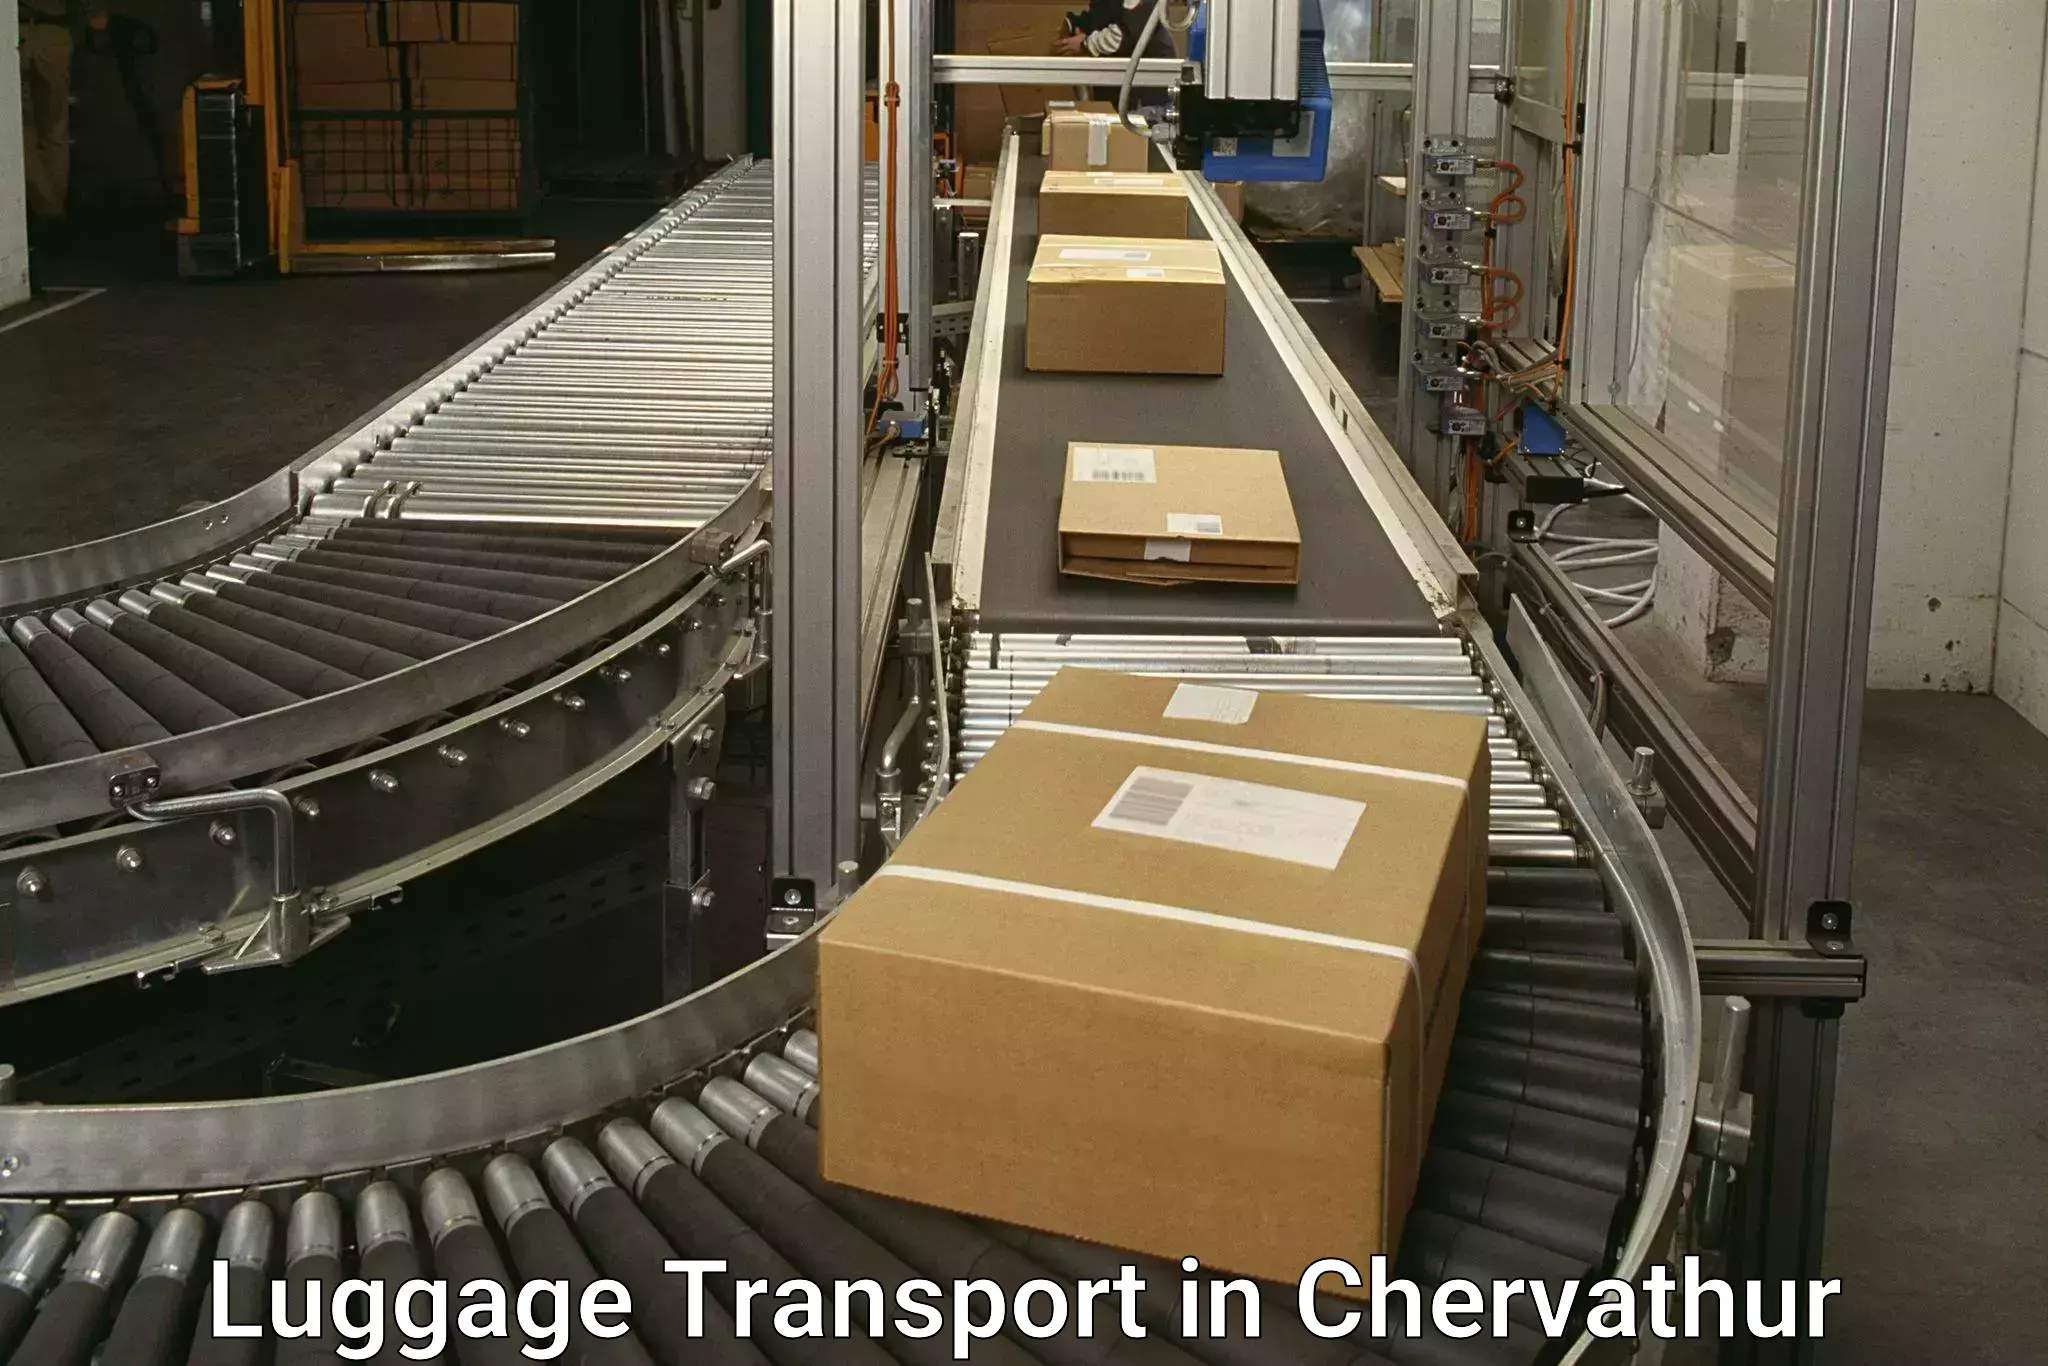 Luggage transport operations in Chervathur